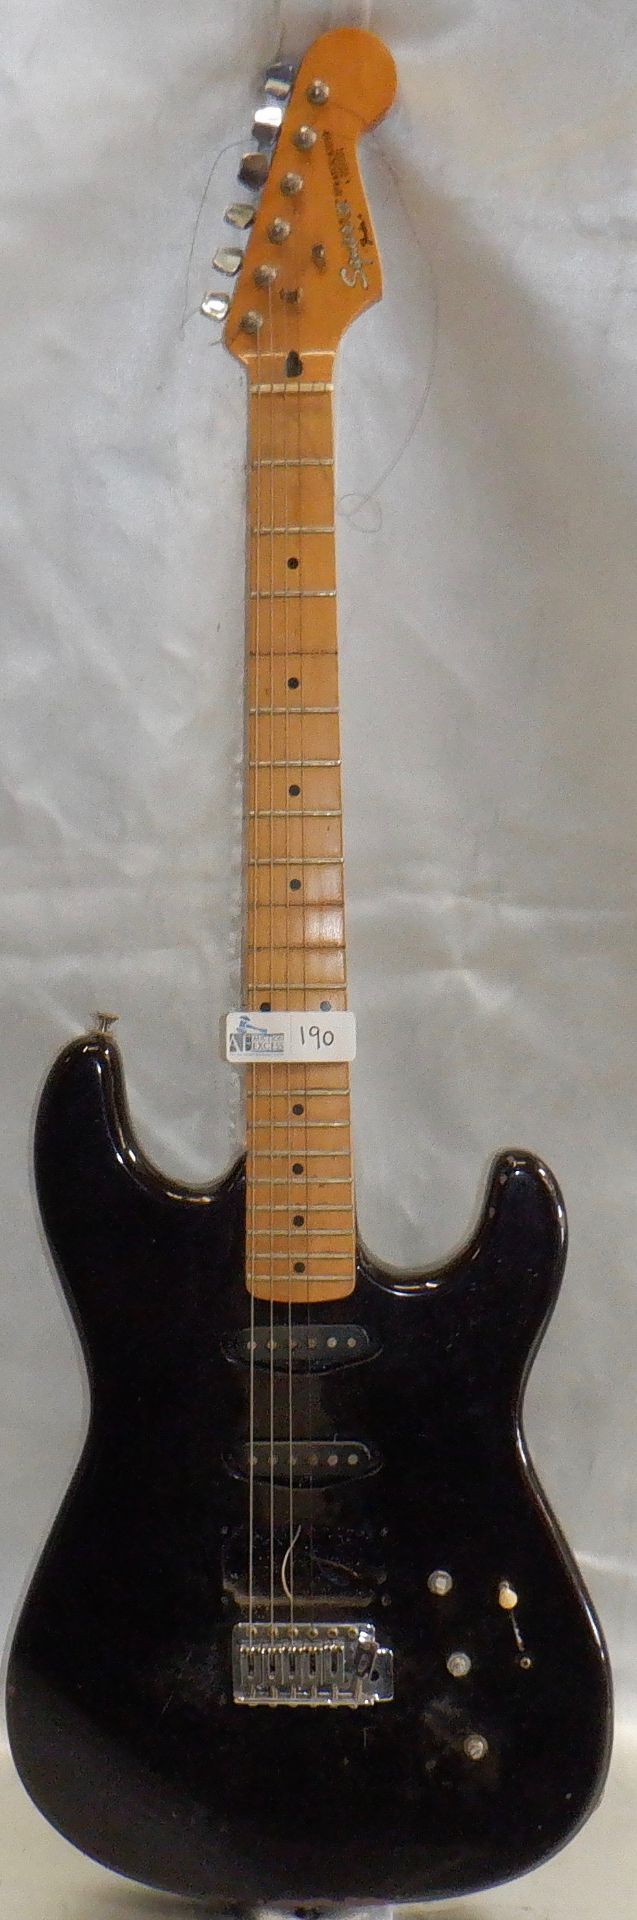 FENDER SQUIRE II STRAT GUITAR WITH SOFT CASE